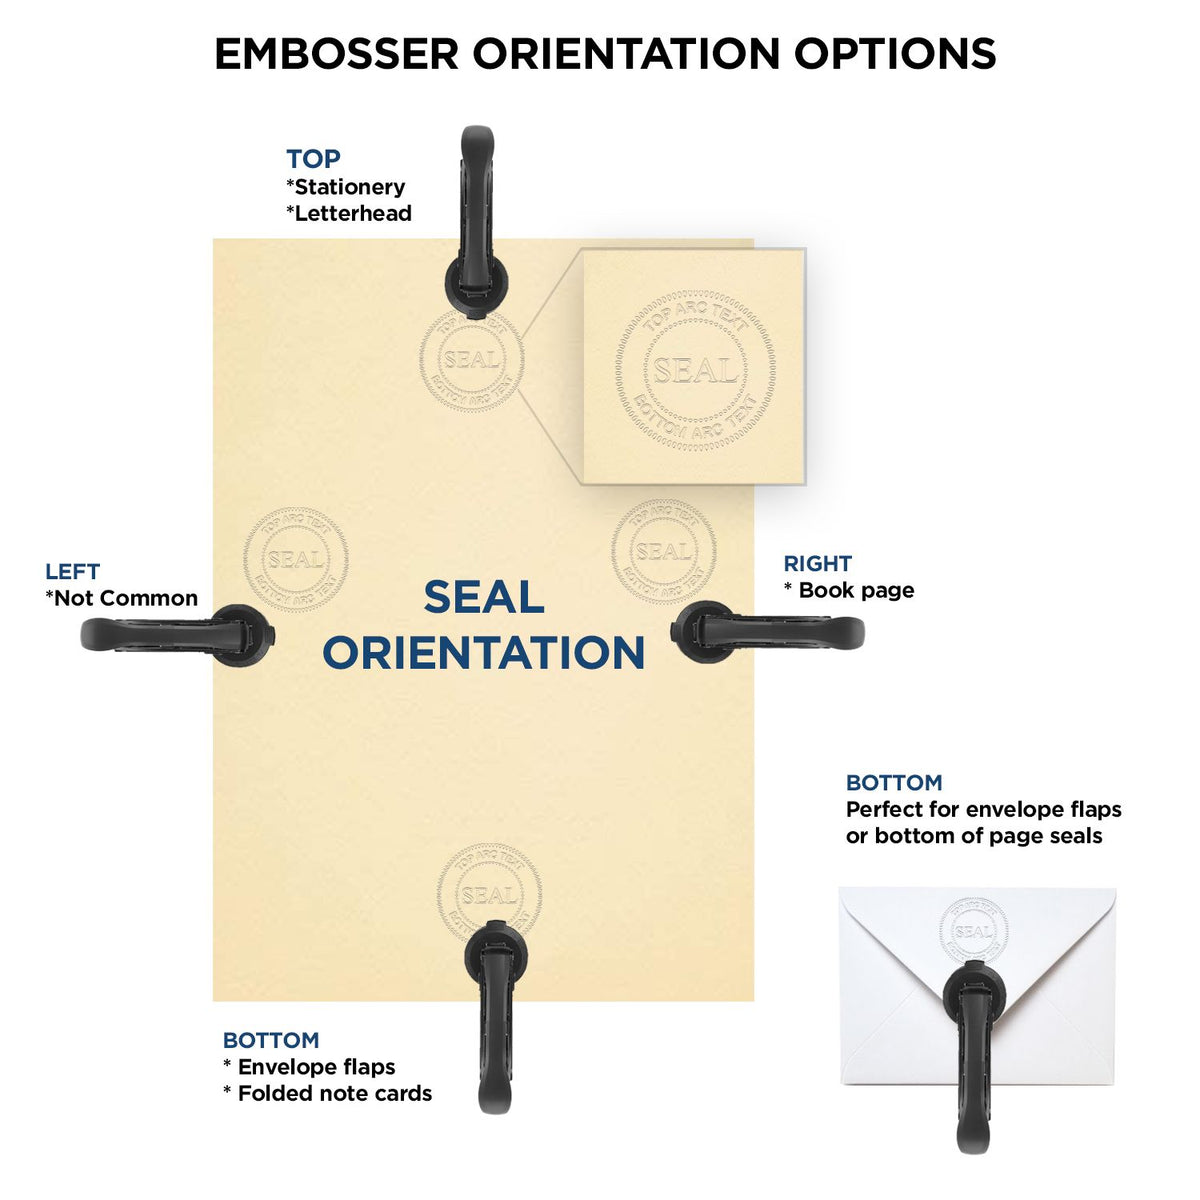 An infographic for the Heavy Duty Cast Iron New York Architect Embosser showing embosser orientation, this is showing examples of a top, bottom, right and left insert.